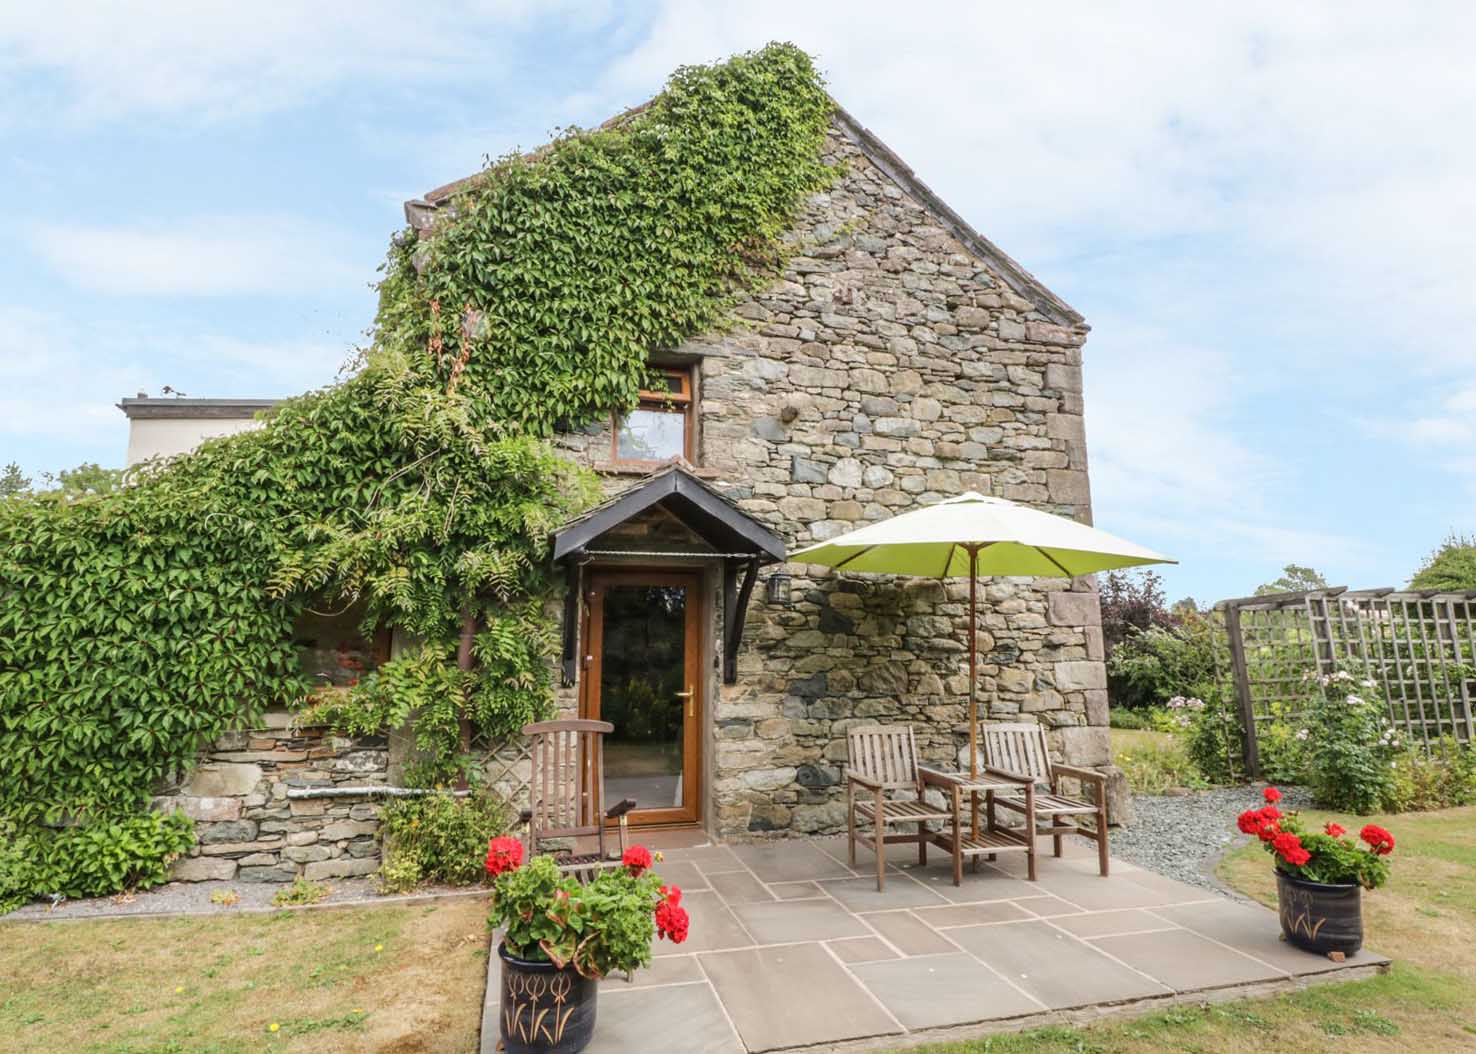 Stone built Lake District Cottage with pretty green plants growing up the walls and flowers in the garden